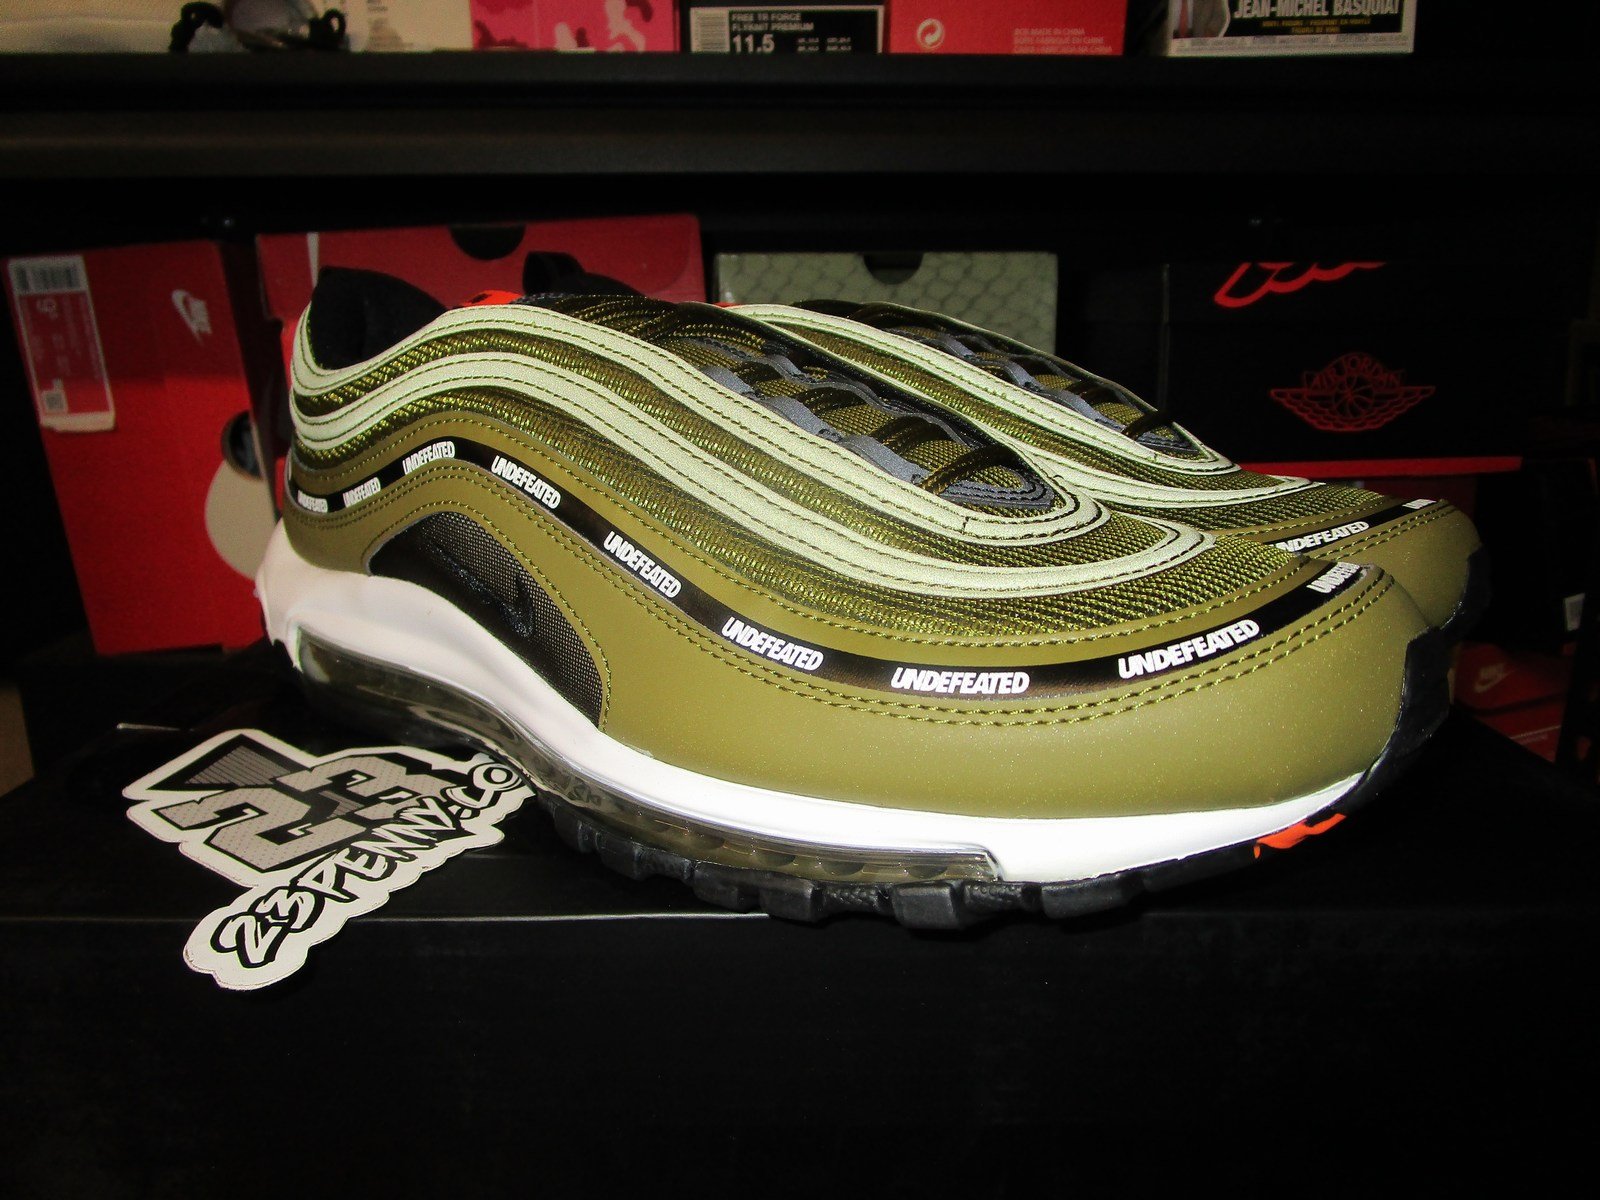 Nike Air Max 97 OG Undftd 'Undefeated - White' Shoes - Size 10.5